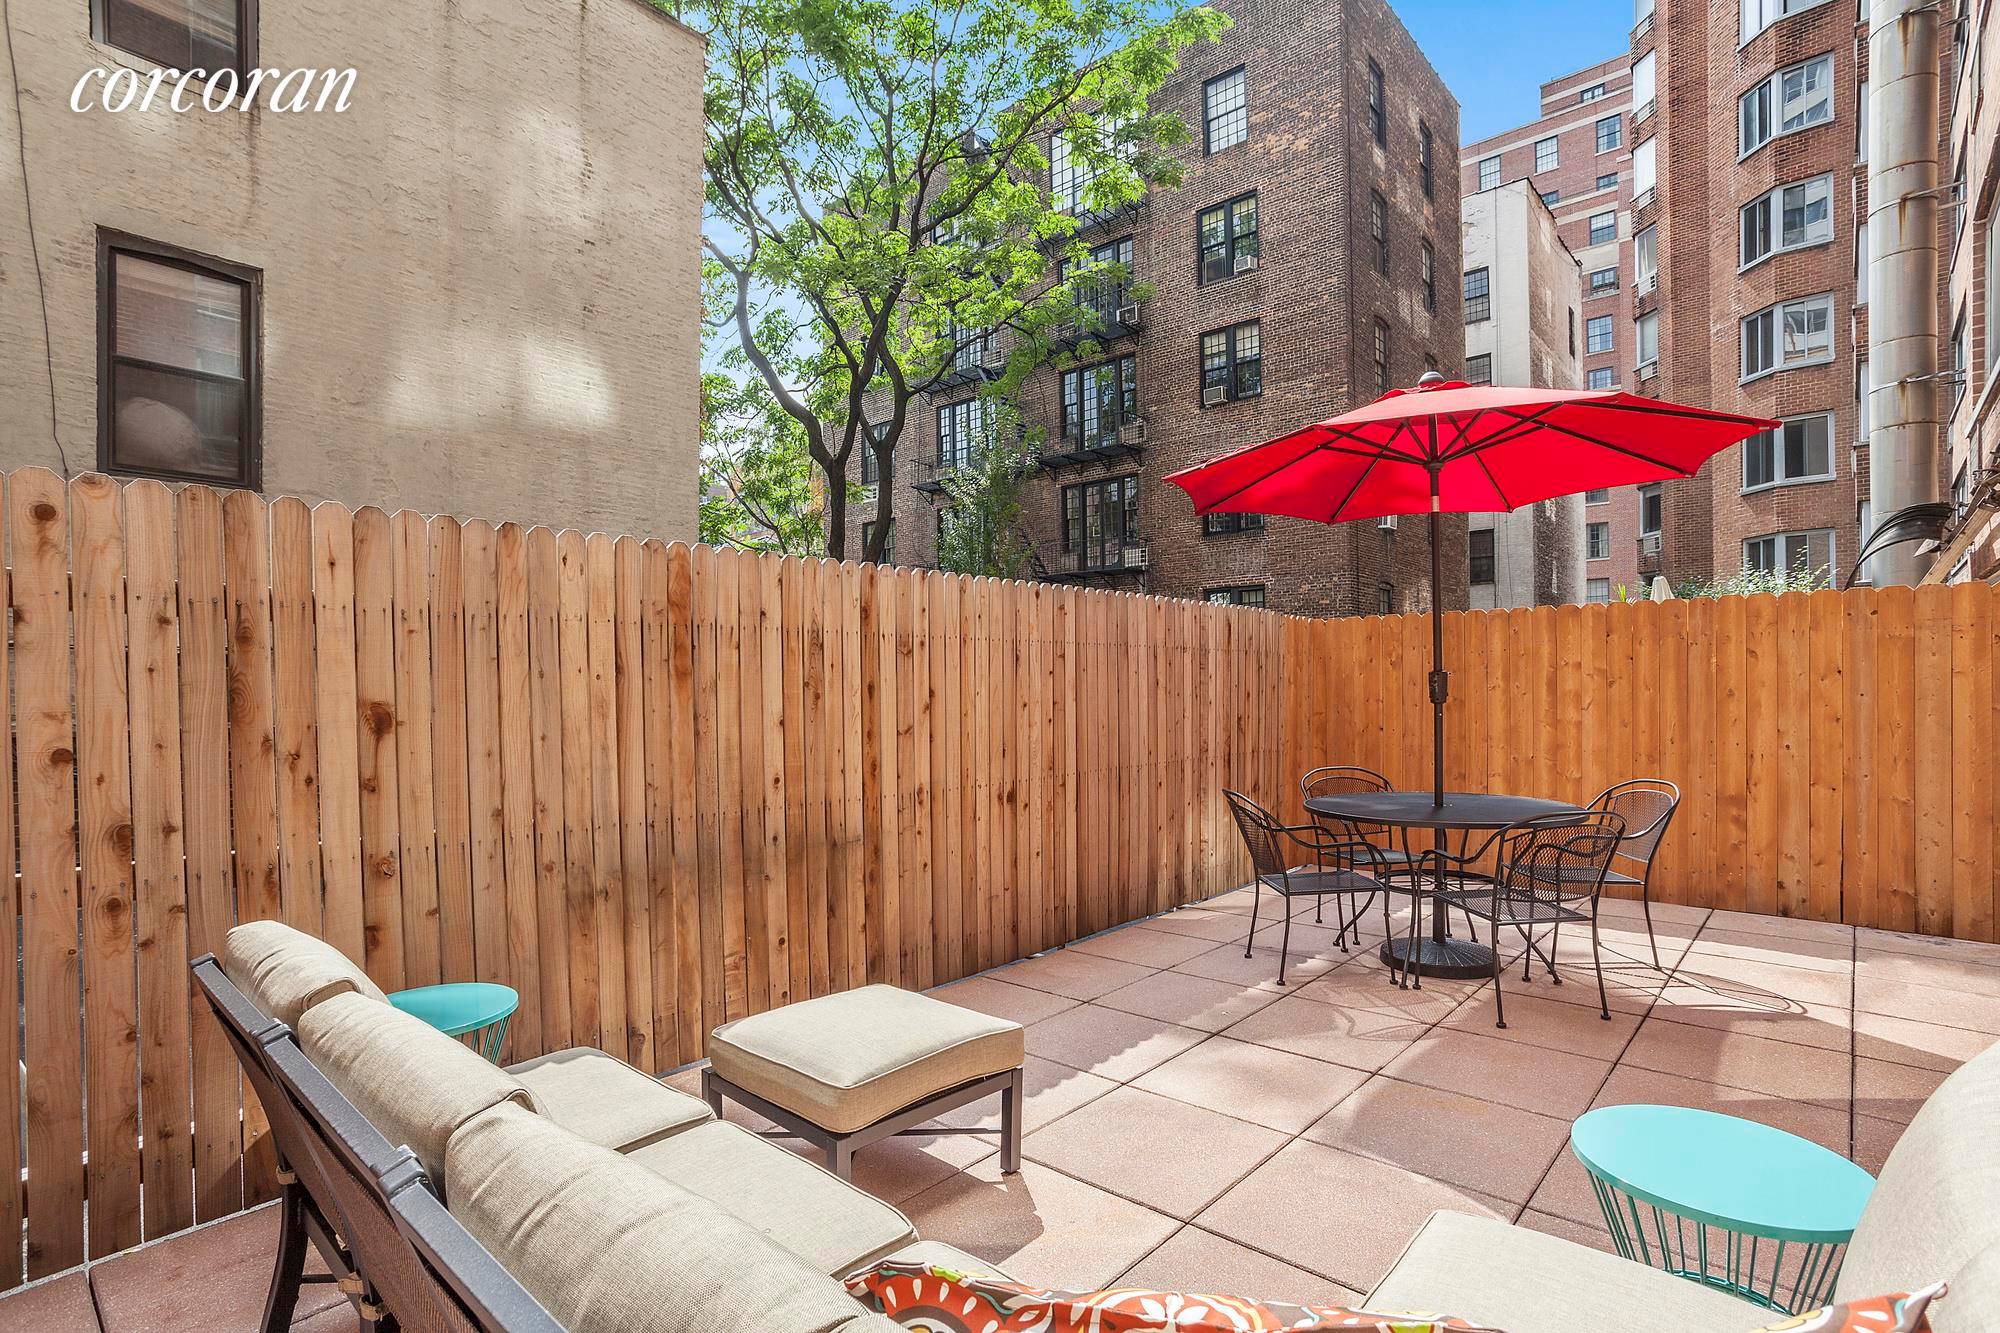 Calling all gardeners ! Serene and tranquil extra large one bedroom home in the heart of Greenwich Village.